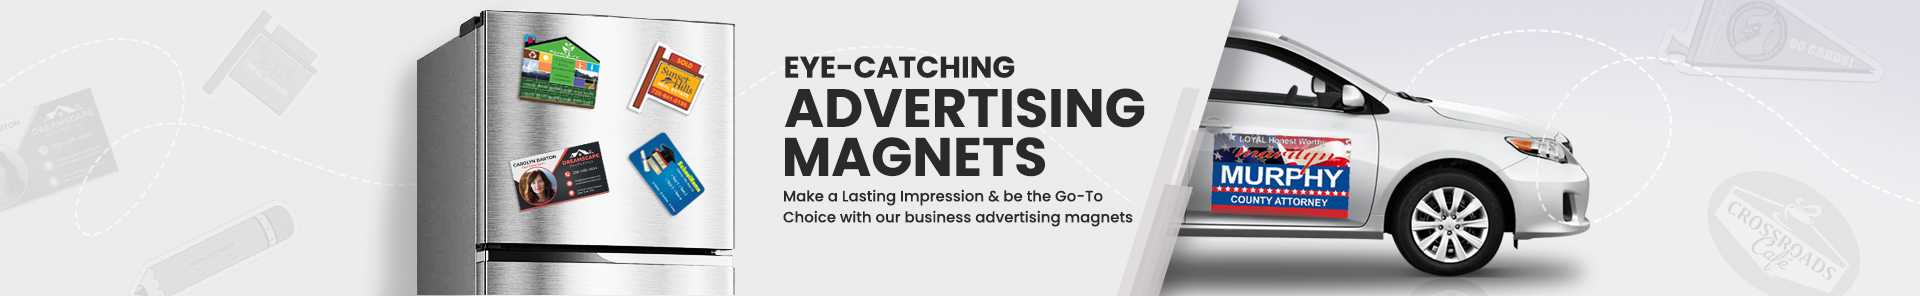 Advertising Magnets